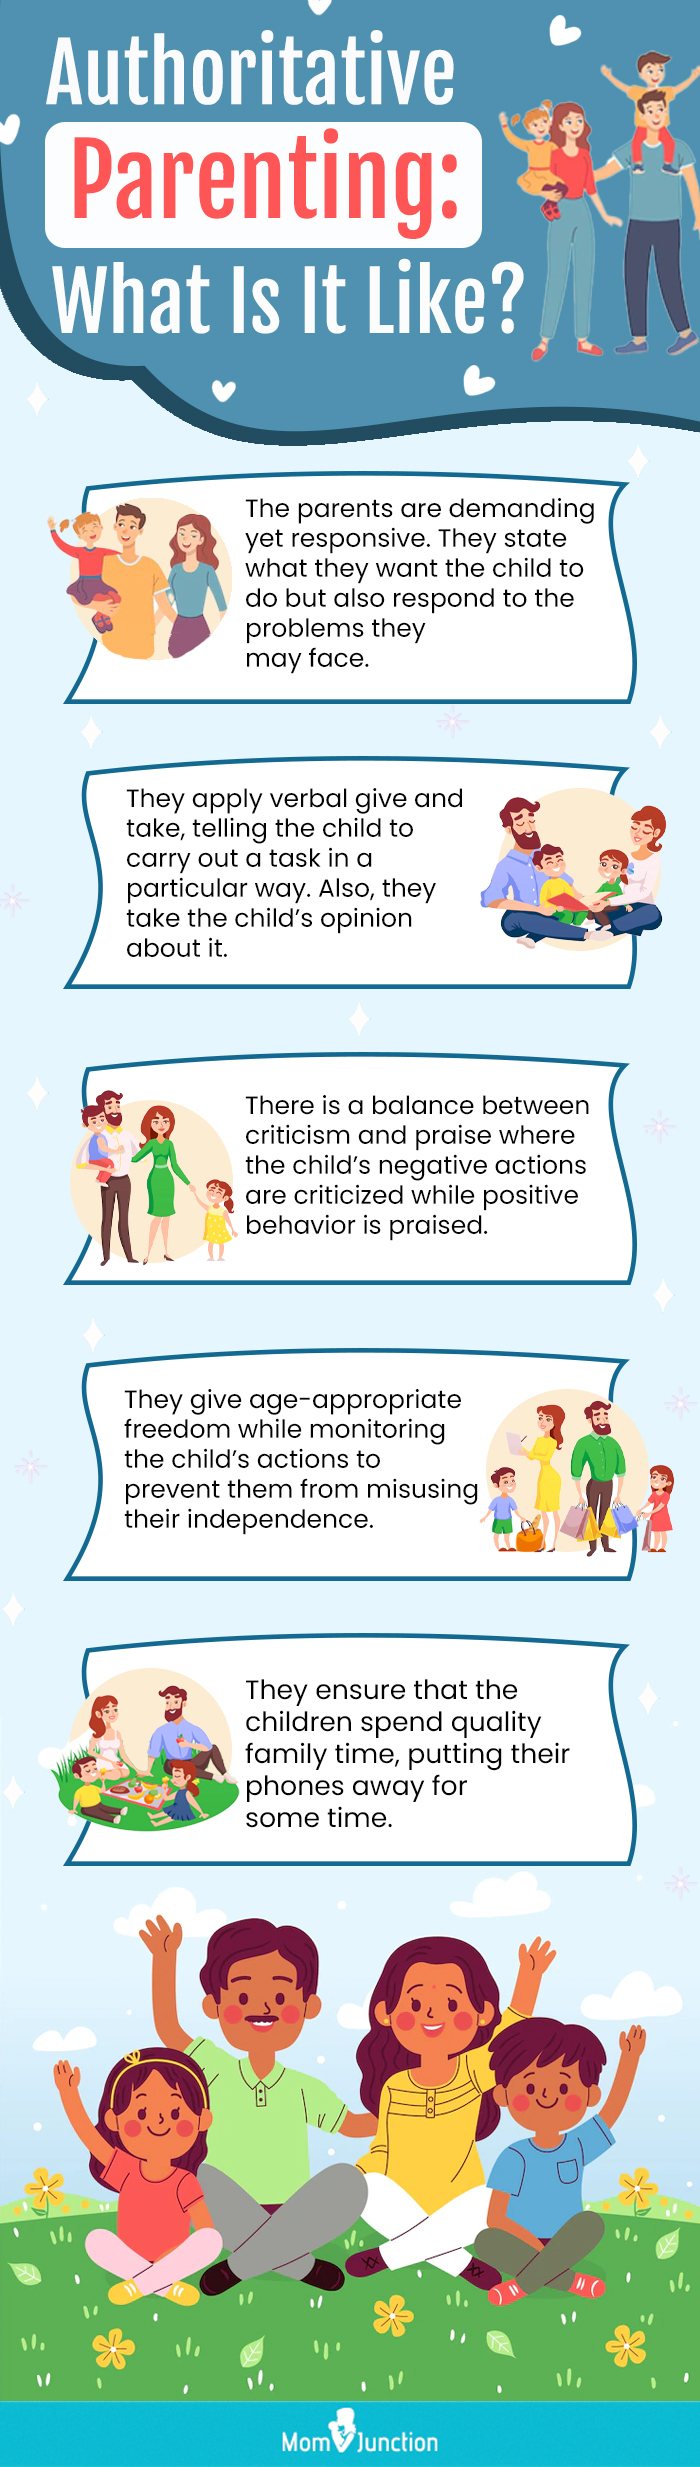 Promoting Independence and Autonomy in Children with Authoritarian Parents